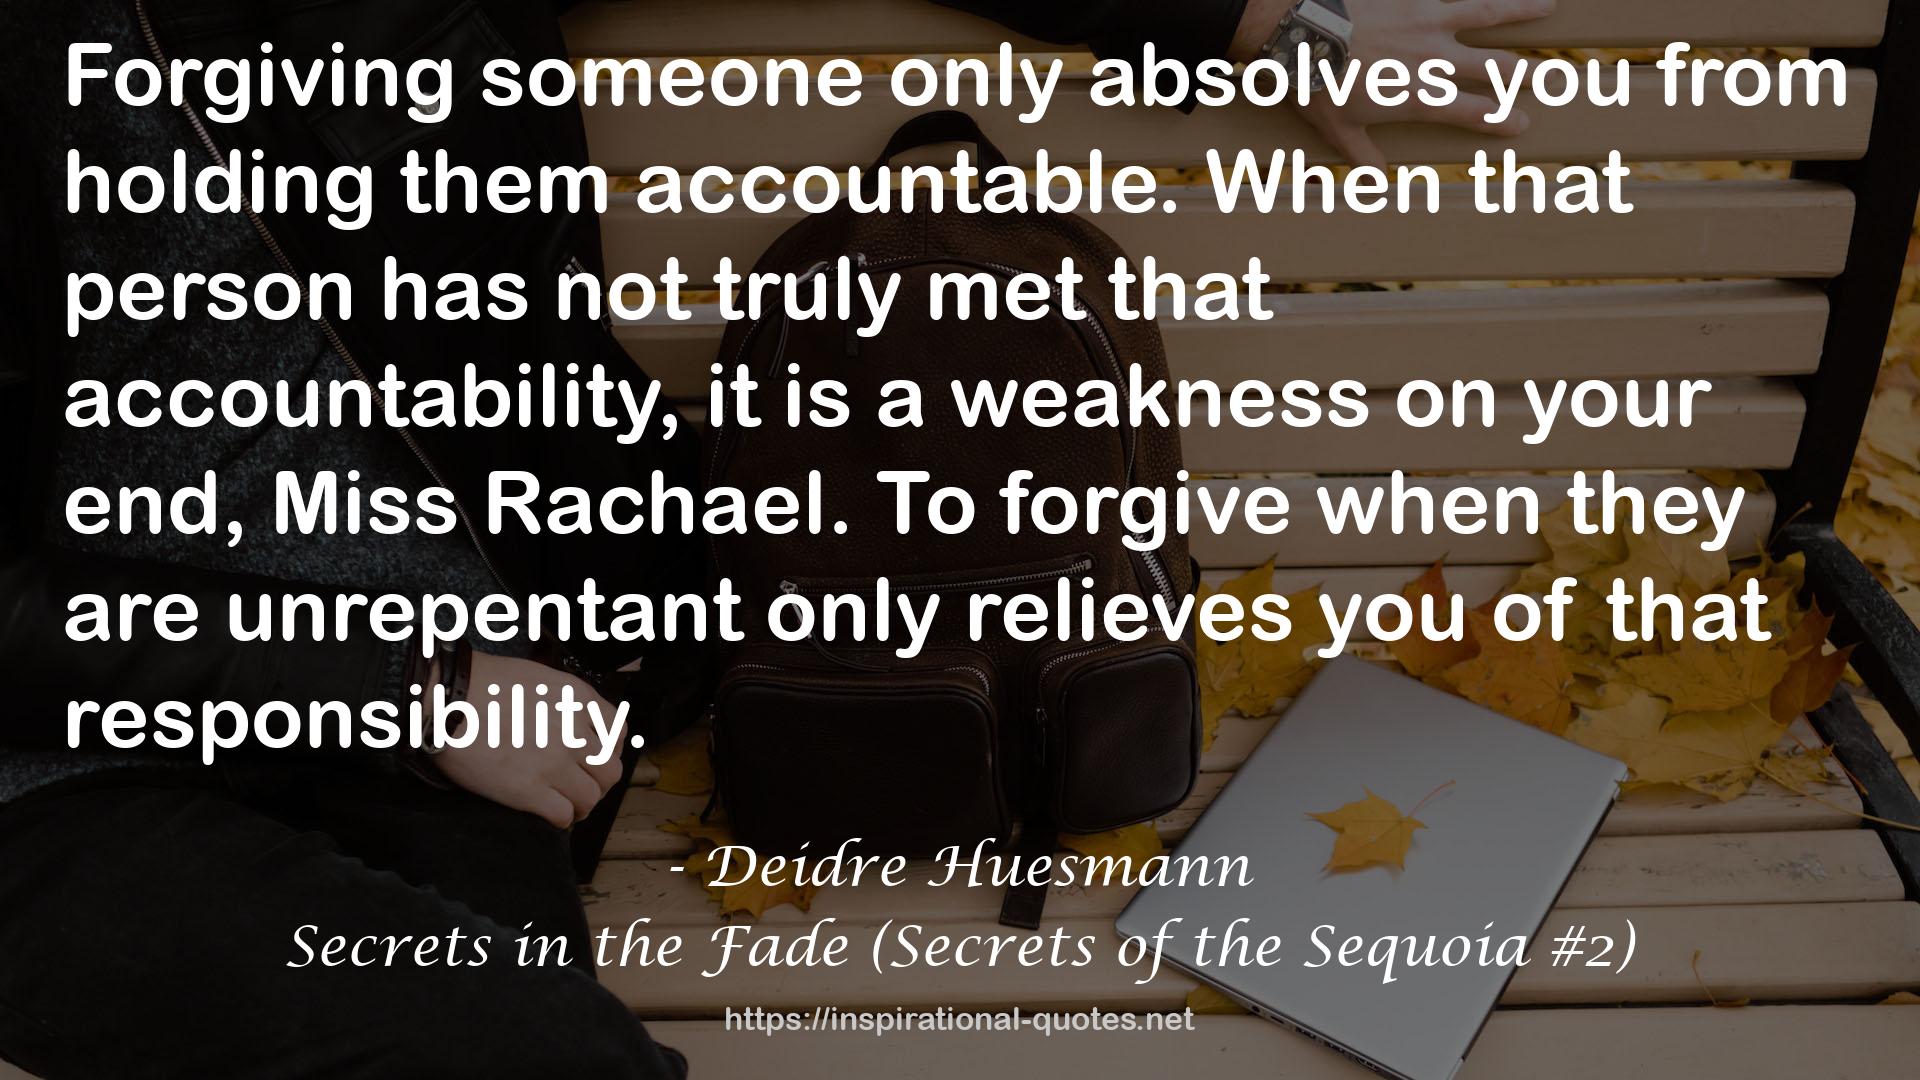 Secrets in the Fade (Secrets of the Sequoia #2) QUOTES